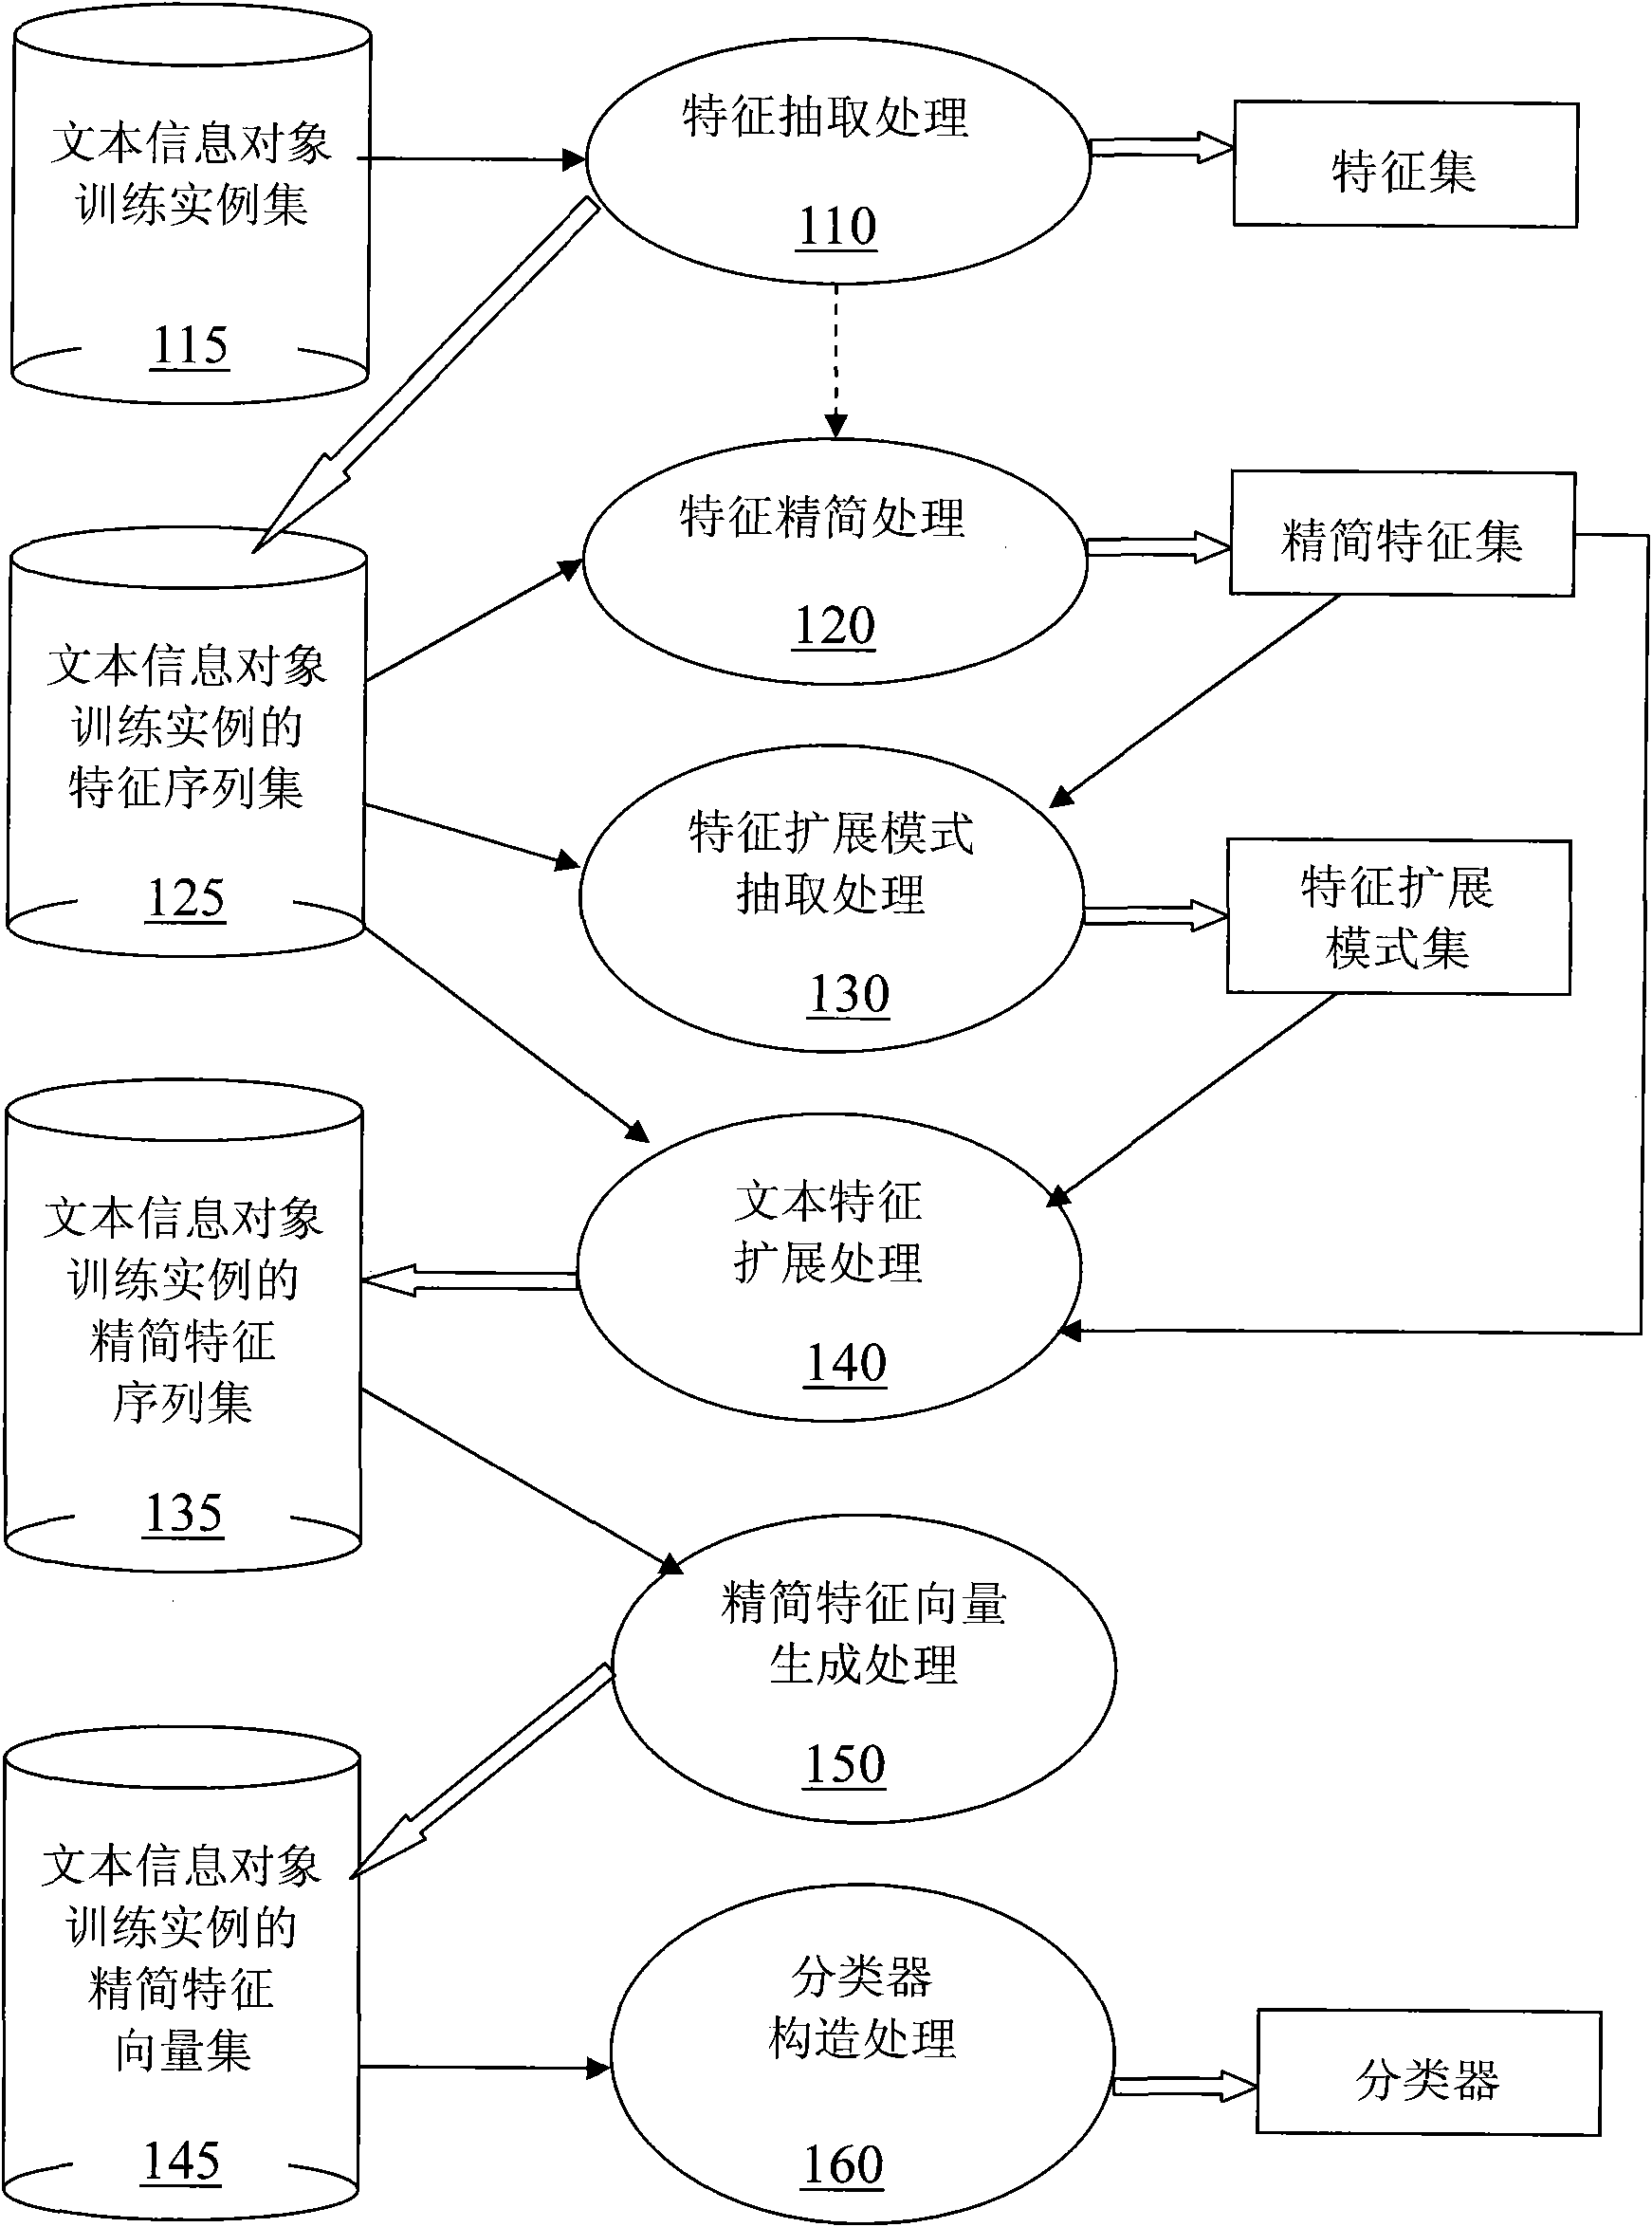 Method and device for classifying text and structuring text classifier by adopting characteristic expansion